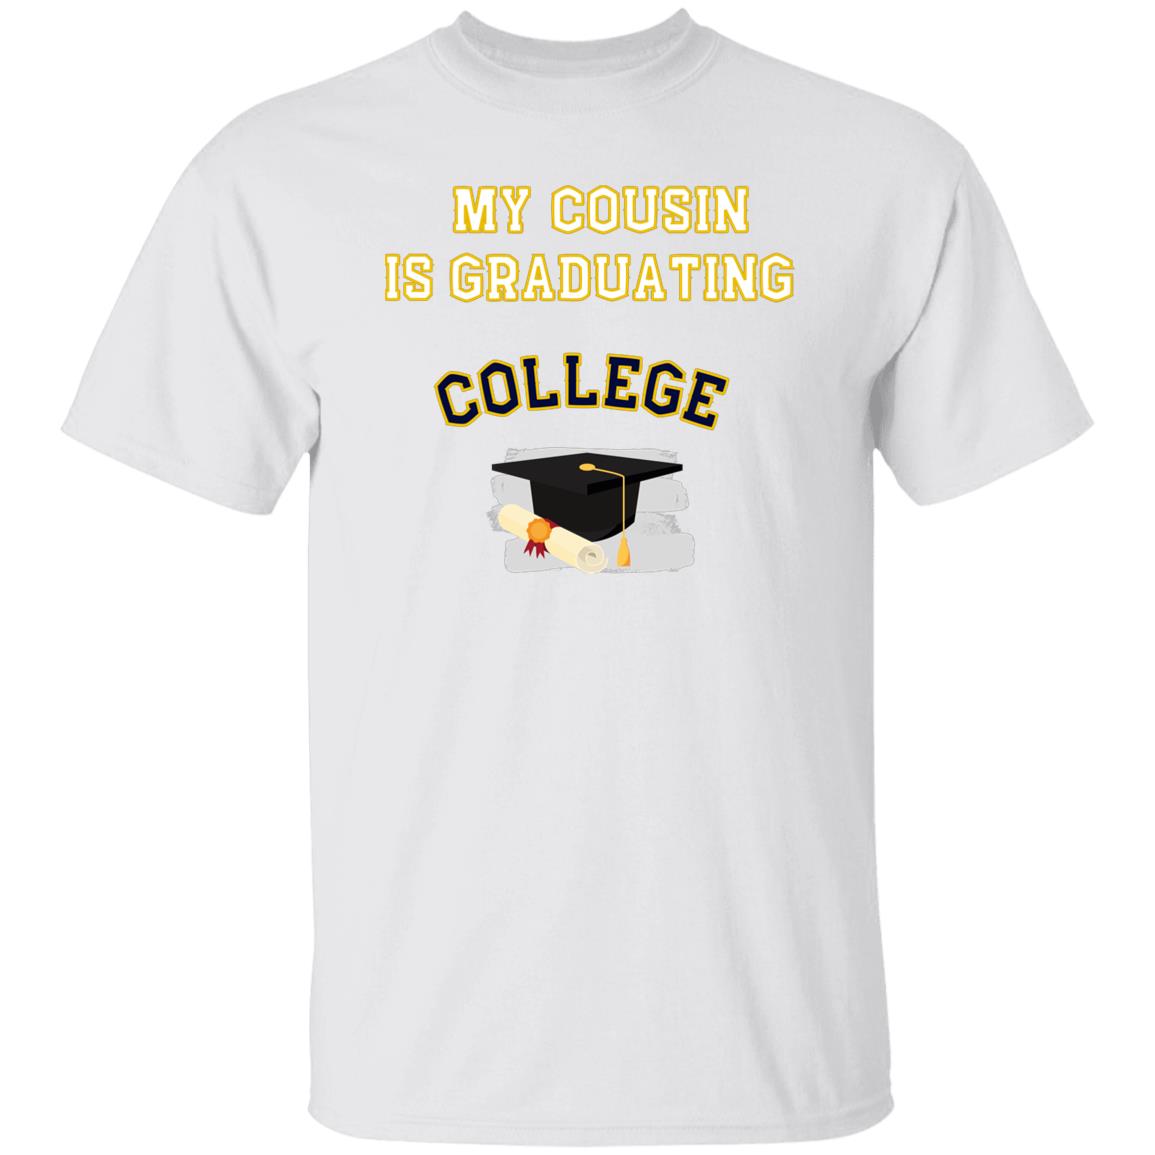 My Cousin is graduating College Tshirt